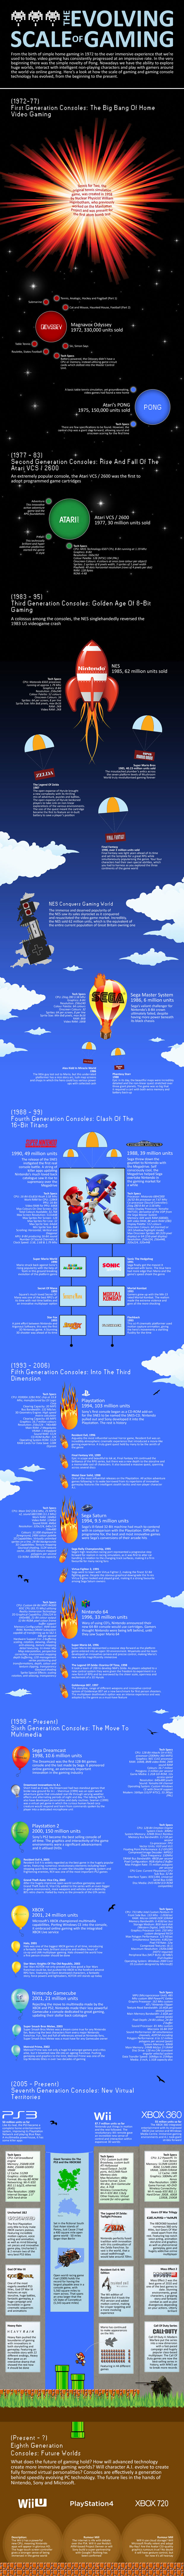 Evolving-Scale-Of-Gaming-Web-Version.jpg